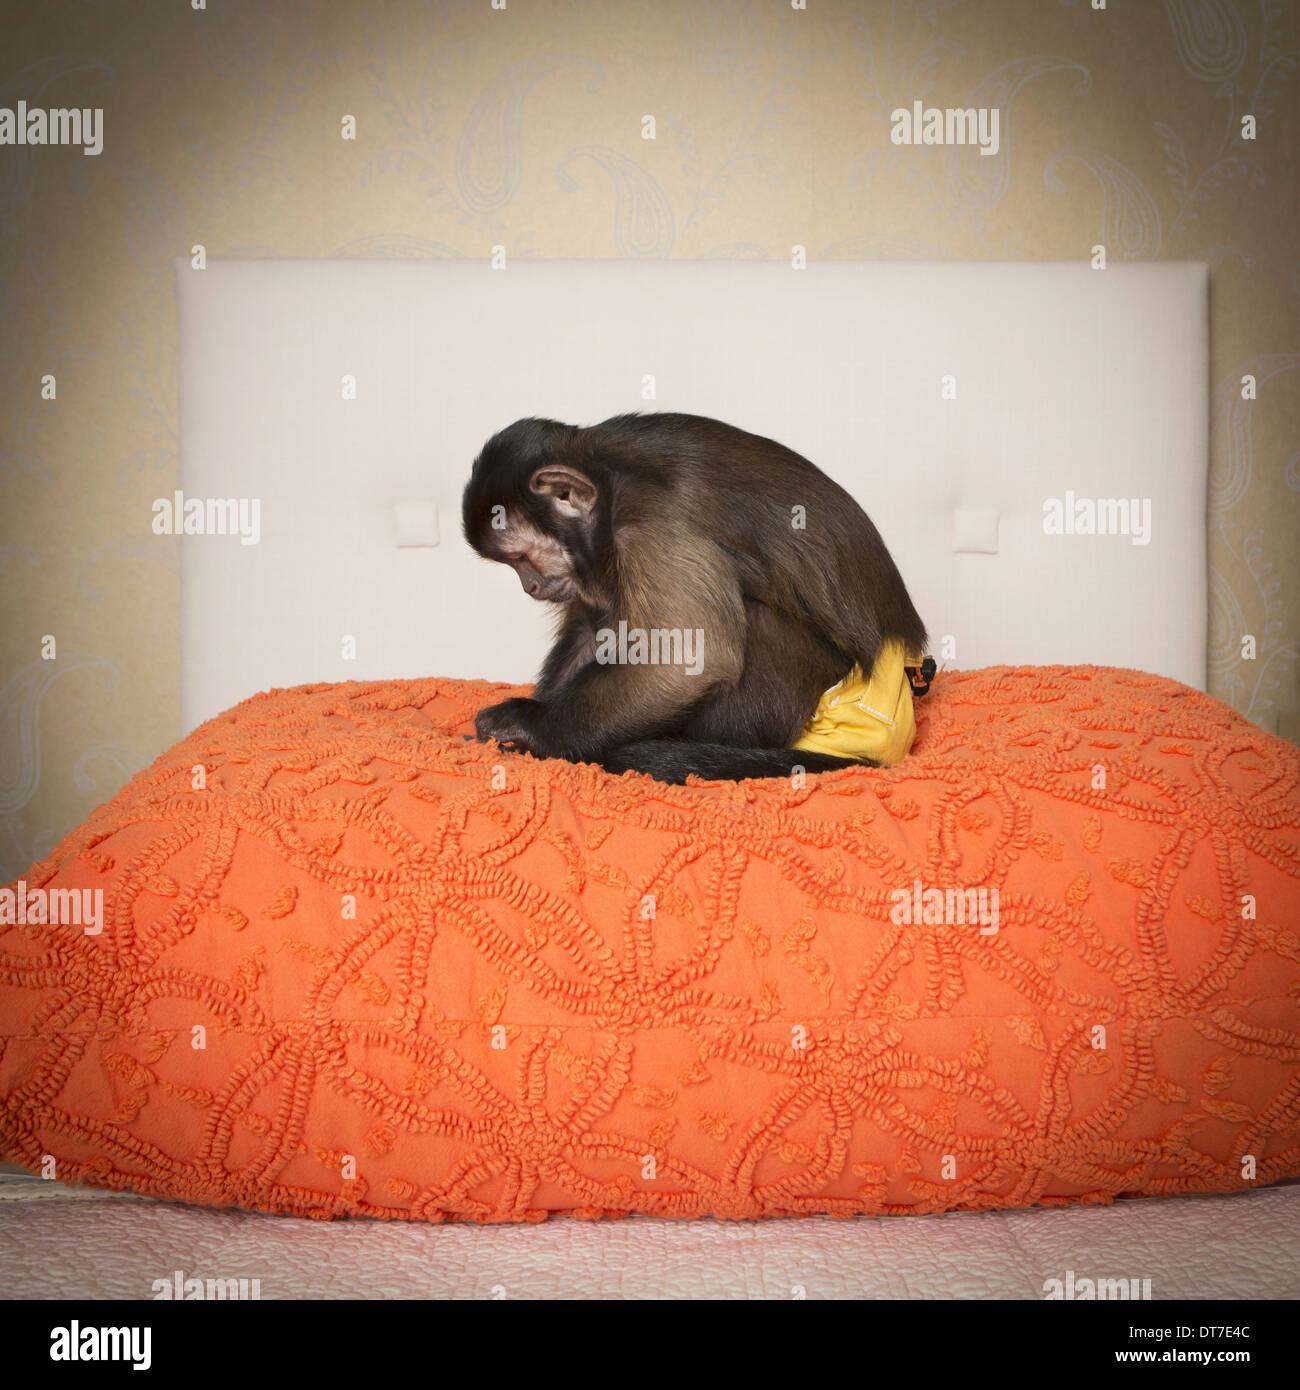 A capuchin monkey seated on a bed in a bedroom An orange coverlet Austin Texas USA Stock Photo